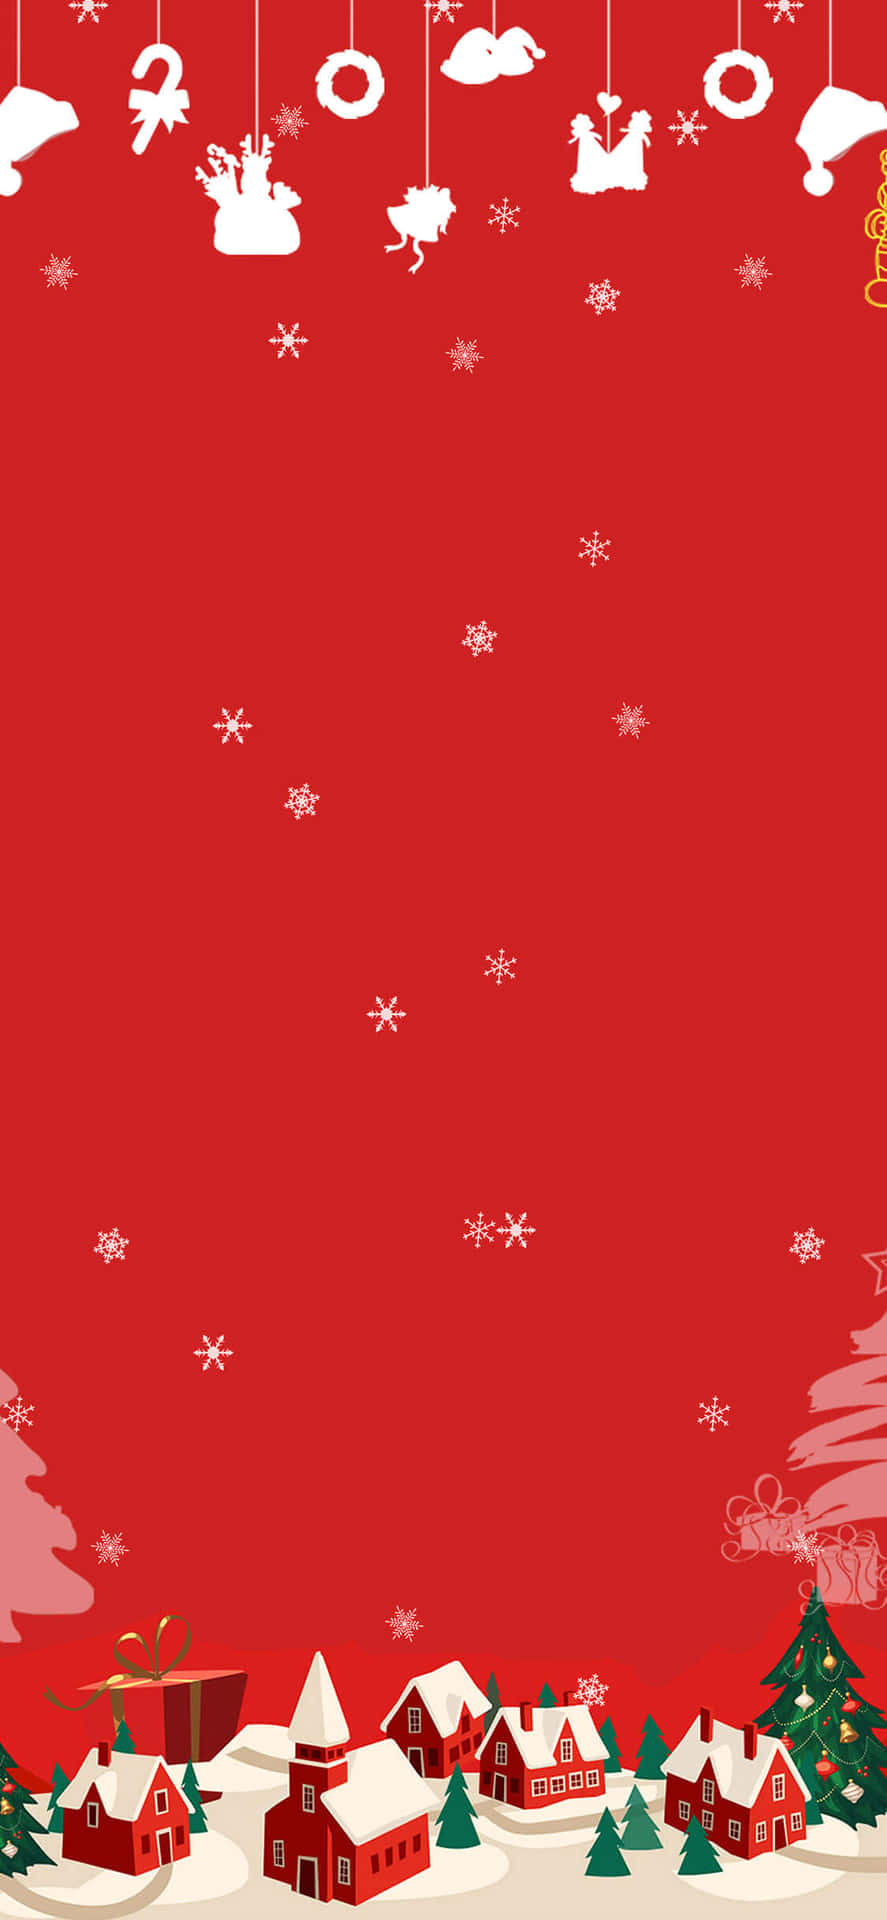 Get ready for the holiday season with this Red Christmas Iphone Wallpaper